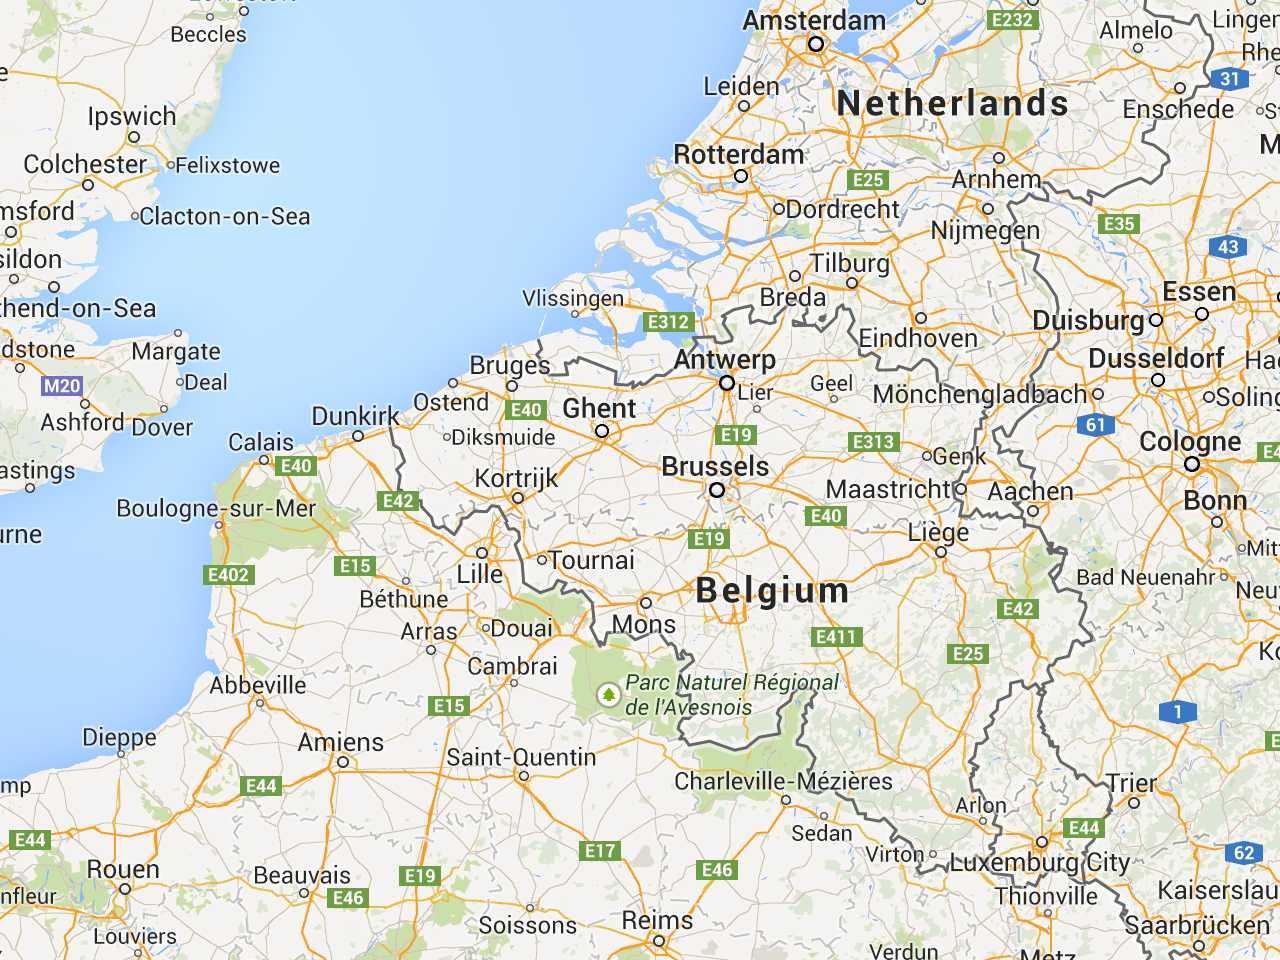 Explosion Reported in Belgian Capital